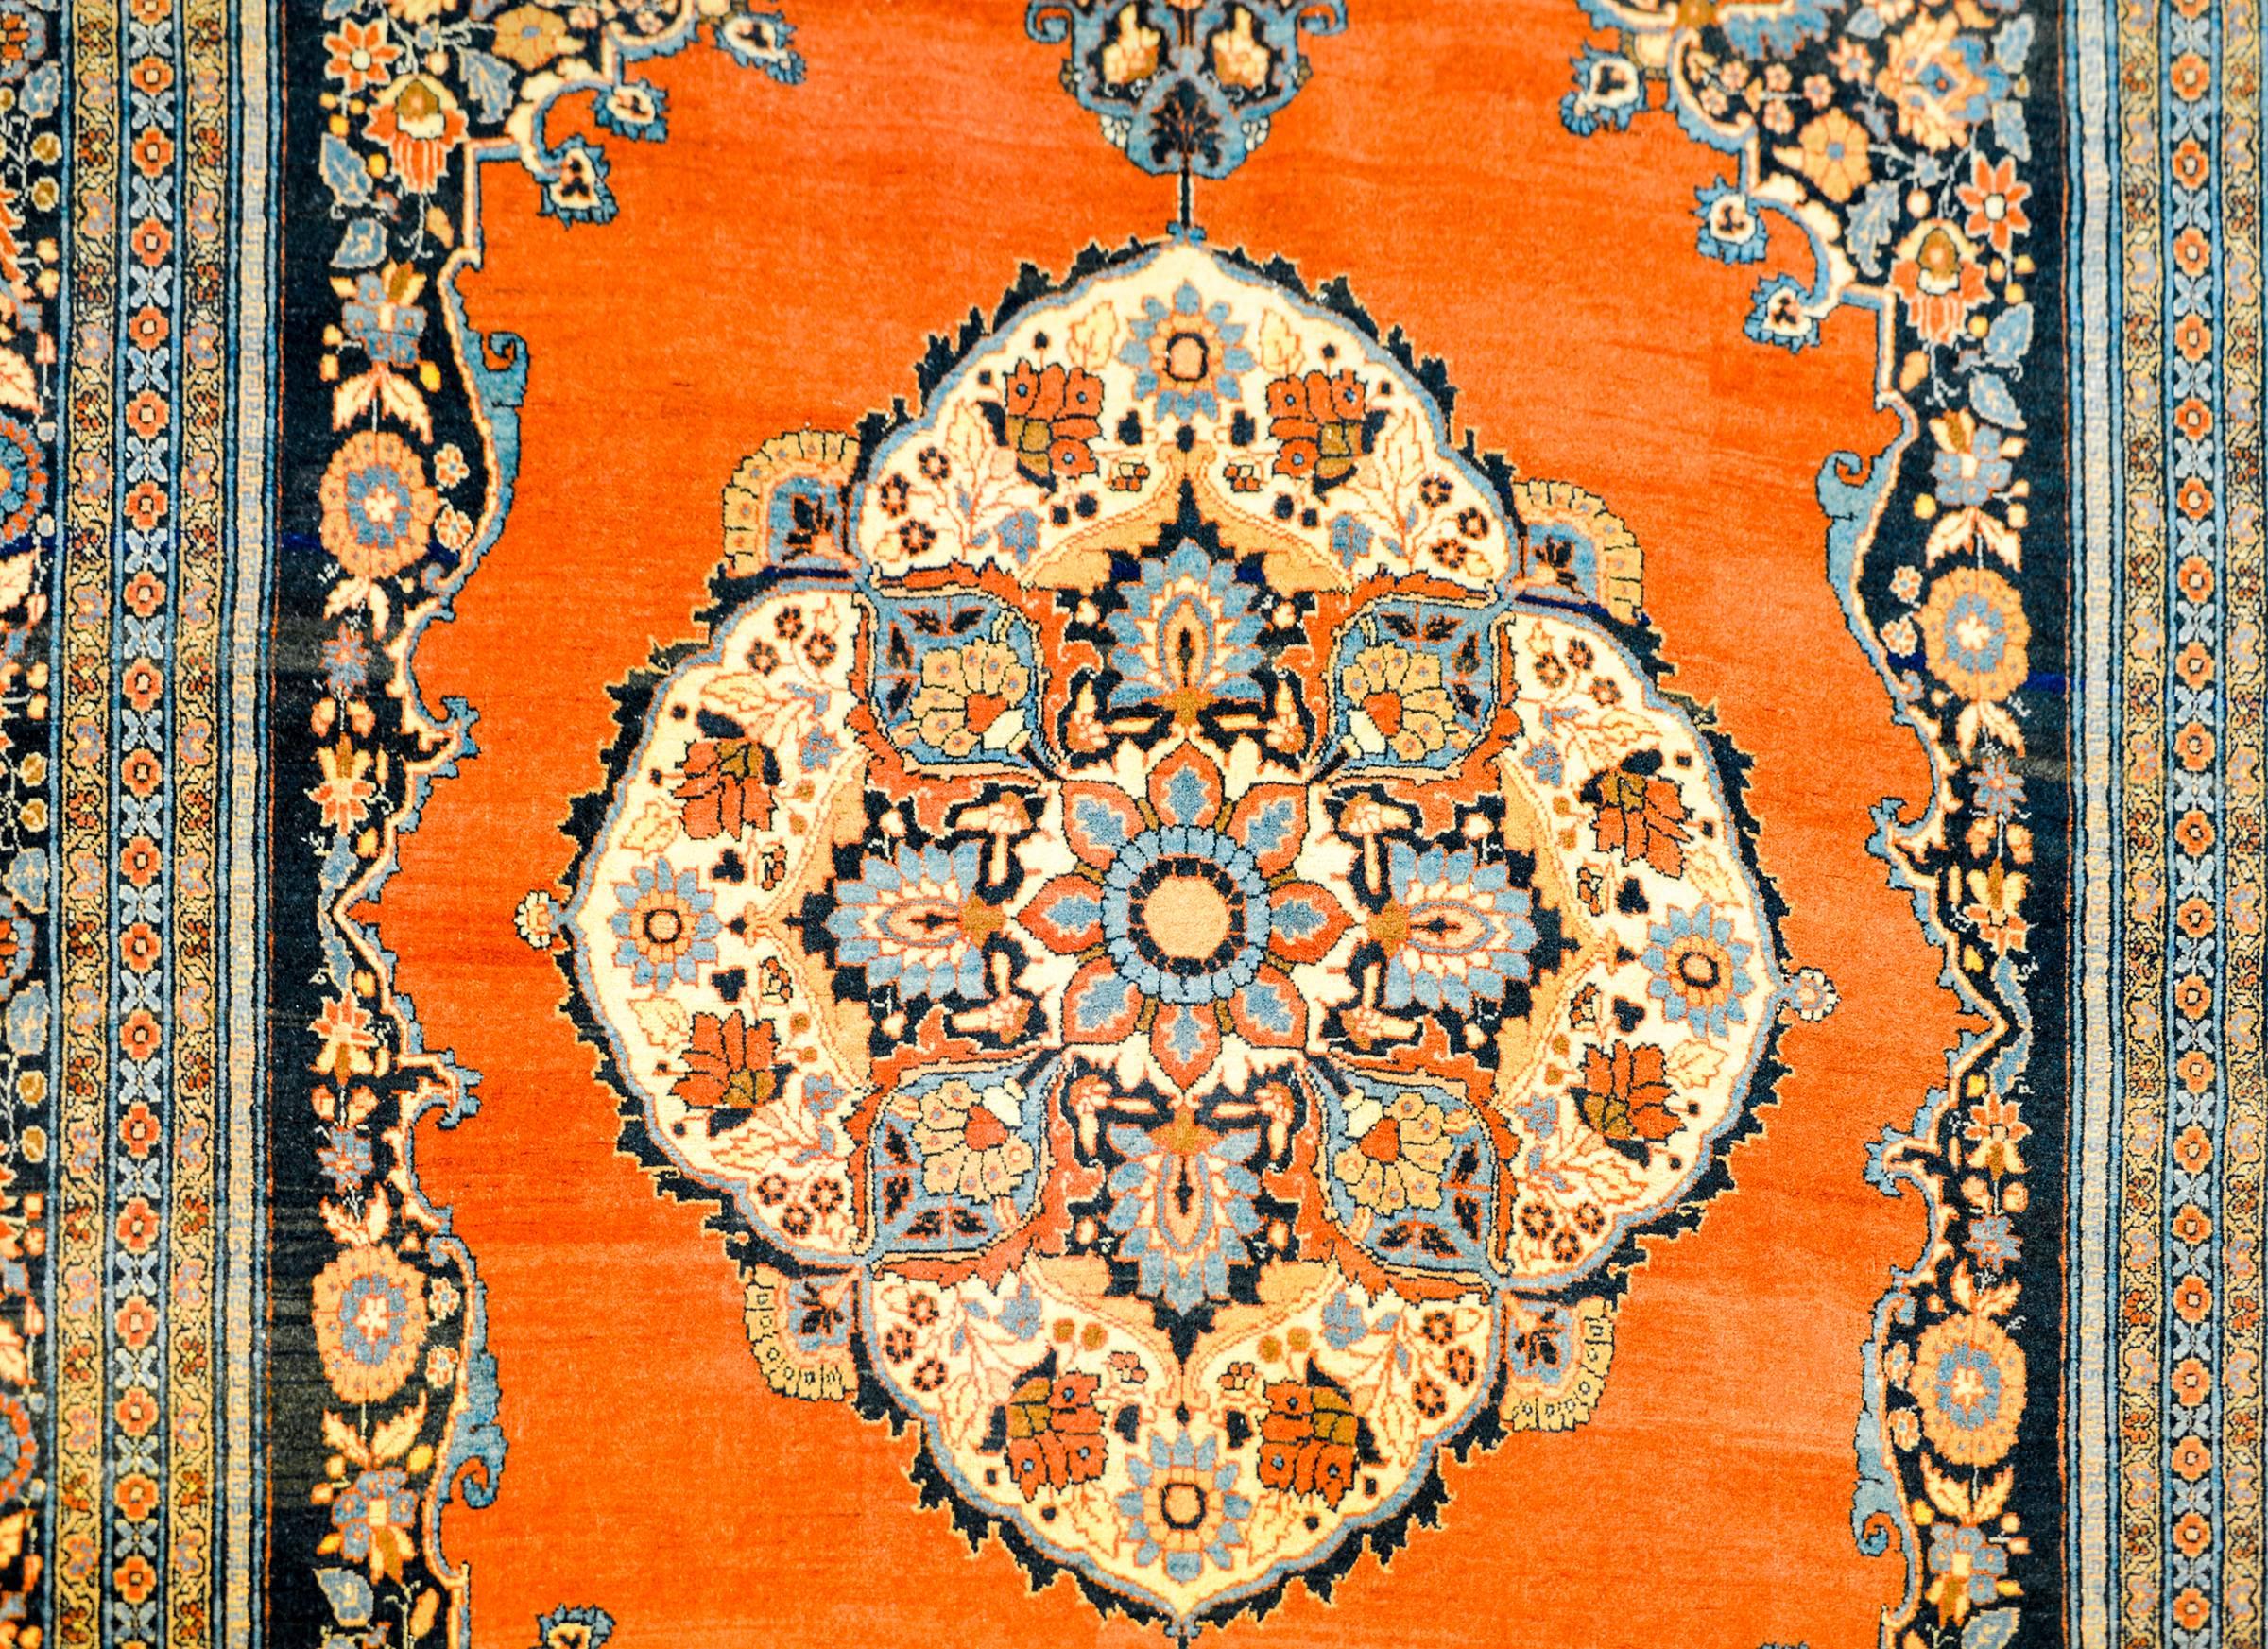 A wonderful vintage, Persian Tabriz rug with a mesmerizing pattern of intricately and tightly woven pattern of multicolored flowers on a bold orange background. The border is complex with a large central paisley patterned field with scrolling vines